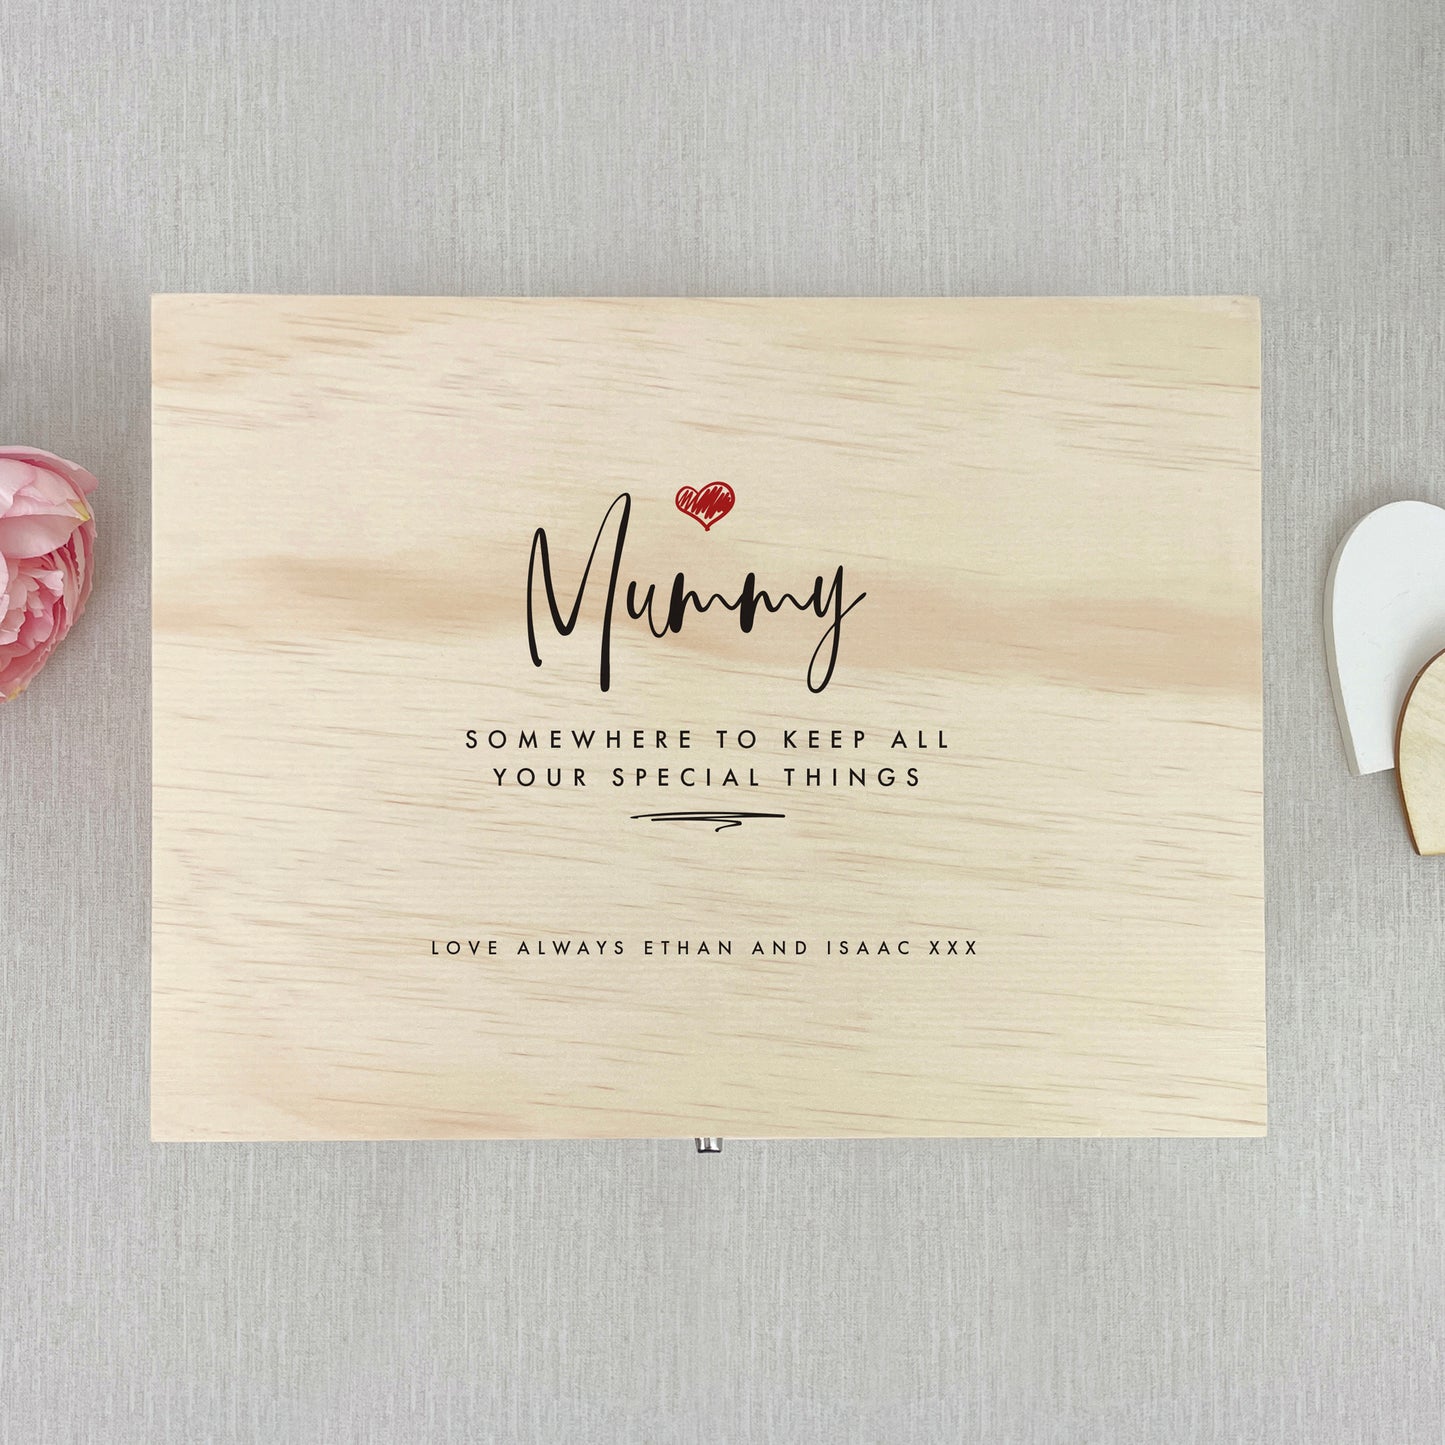 Personalised Any Name/Message Red Heart Wooden Pine Memory Box - 5 Sizes (16cm | 20cm | 26cm | 30cm | 36cm)